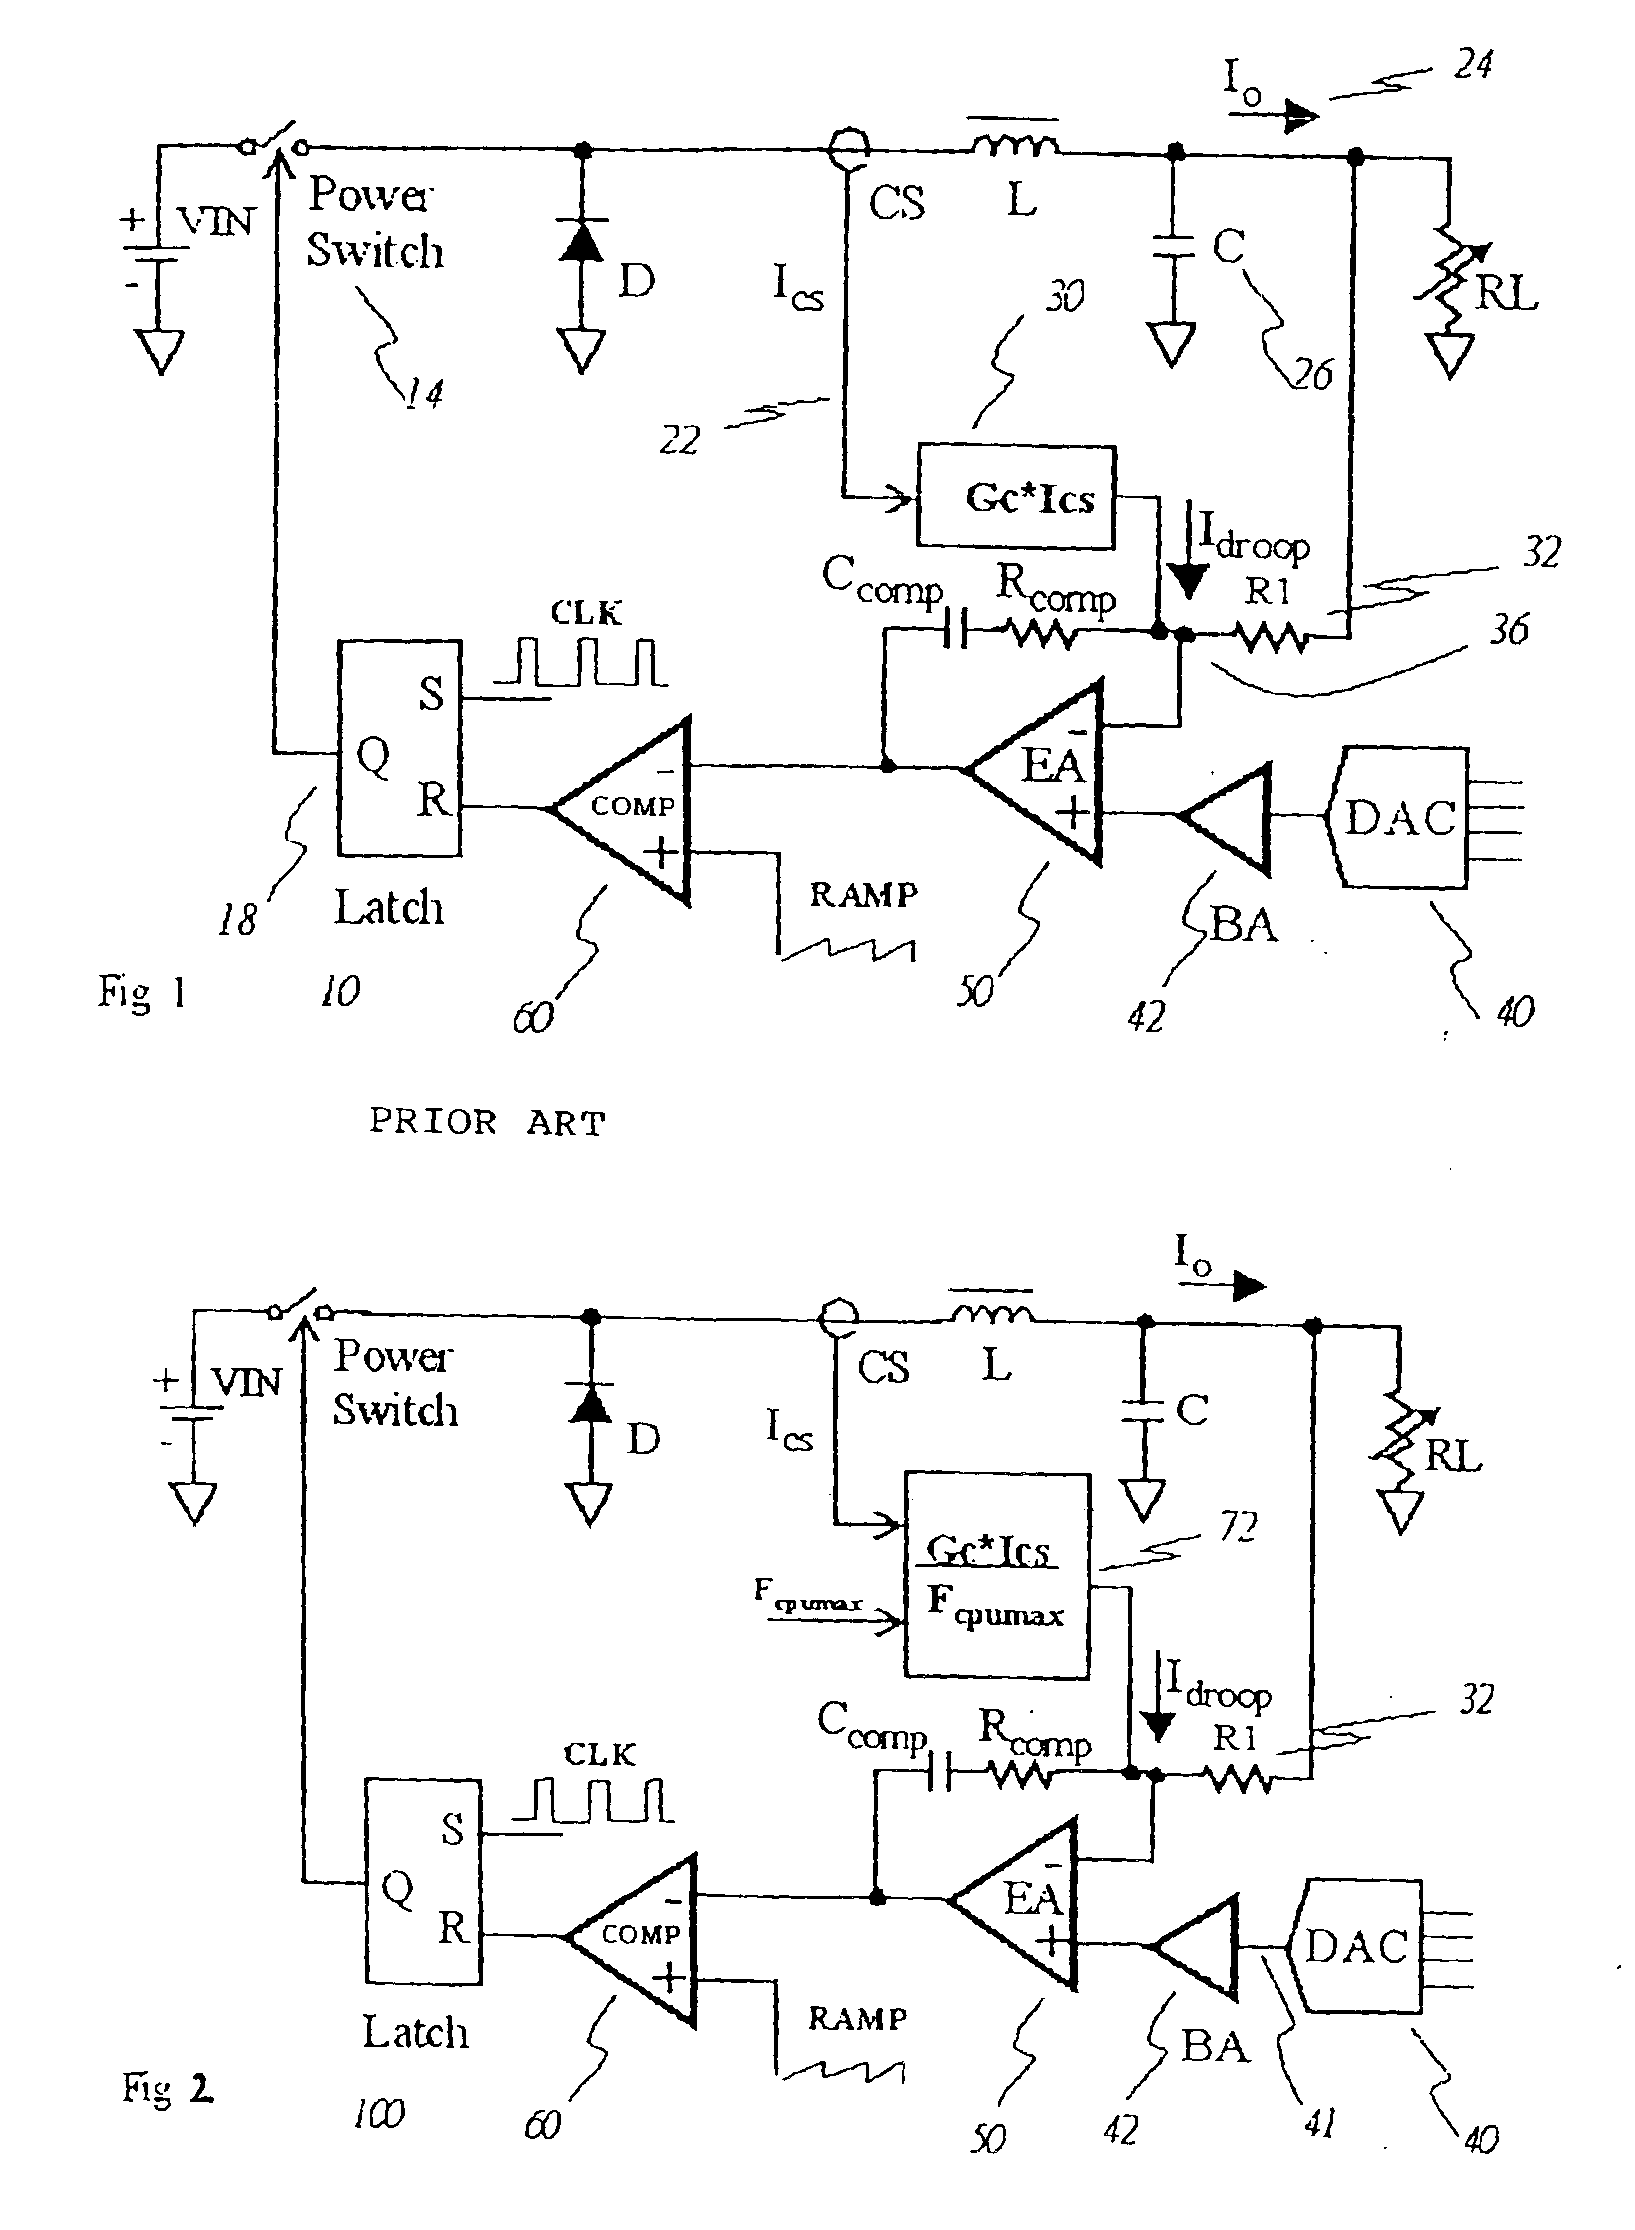 Methods to control the droop when powering dual mode processors and associated circuits